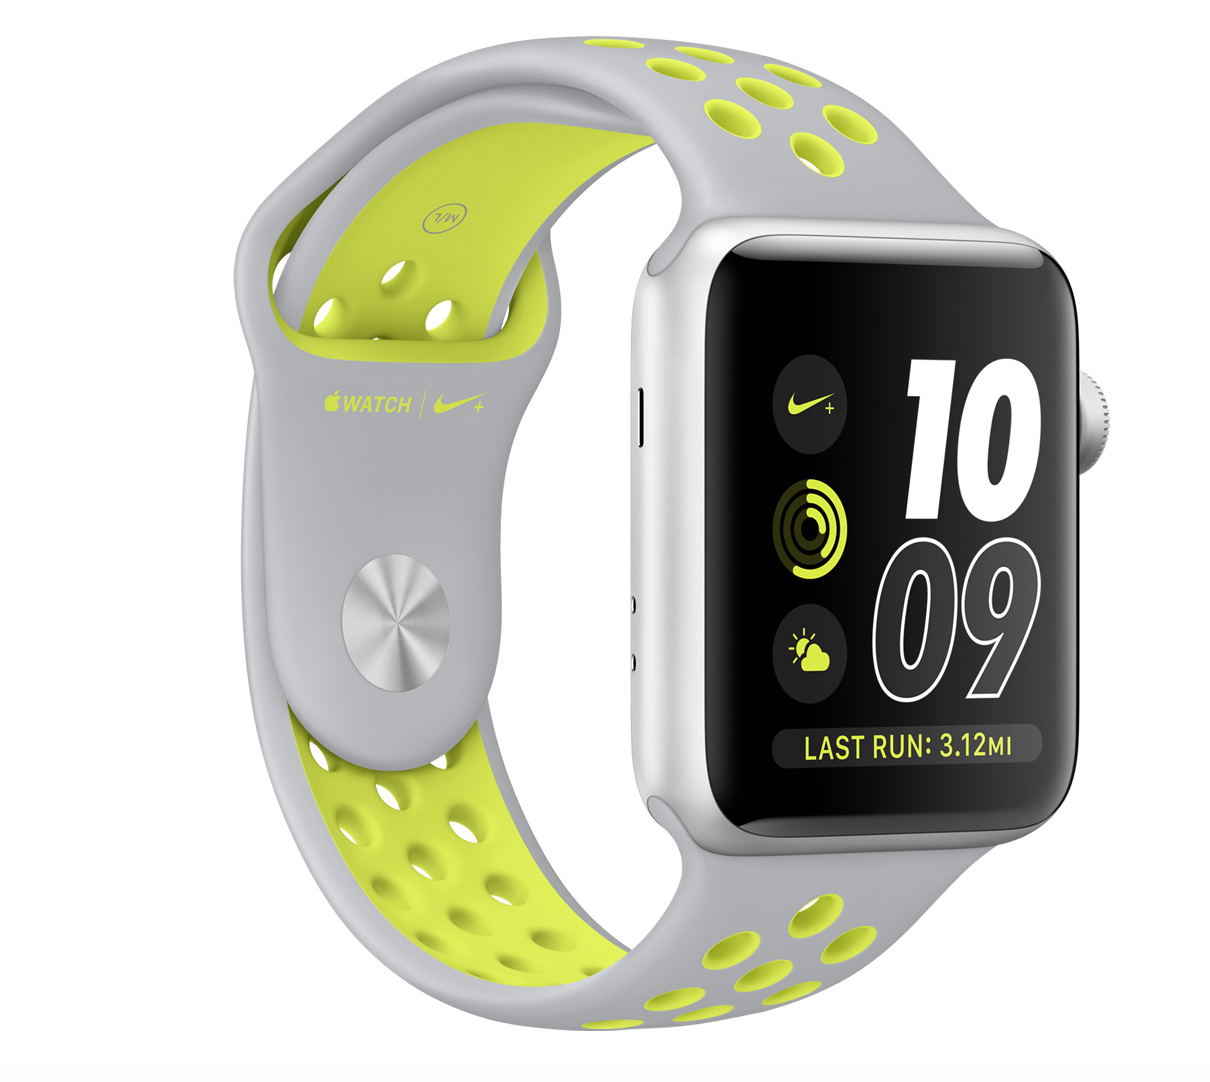 IDC Reports: Apple Watch is a "Magnificent Success"